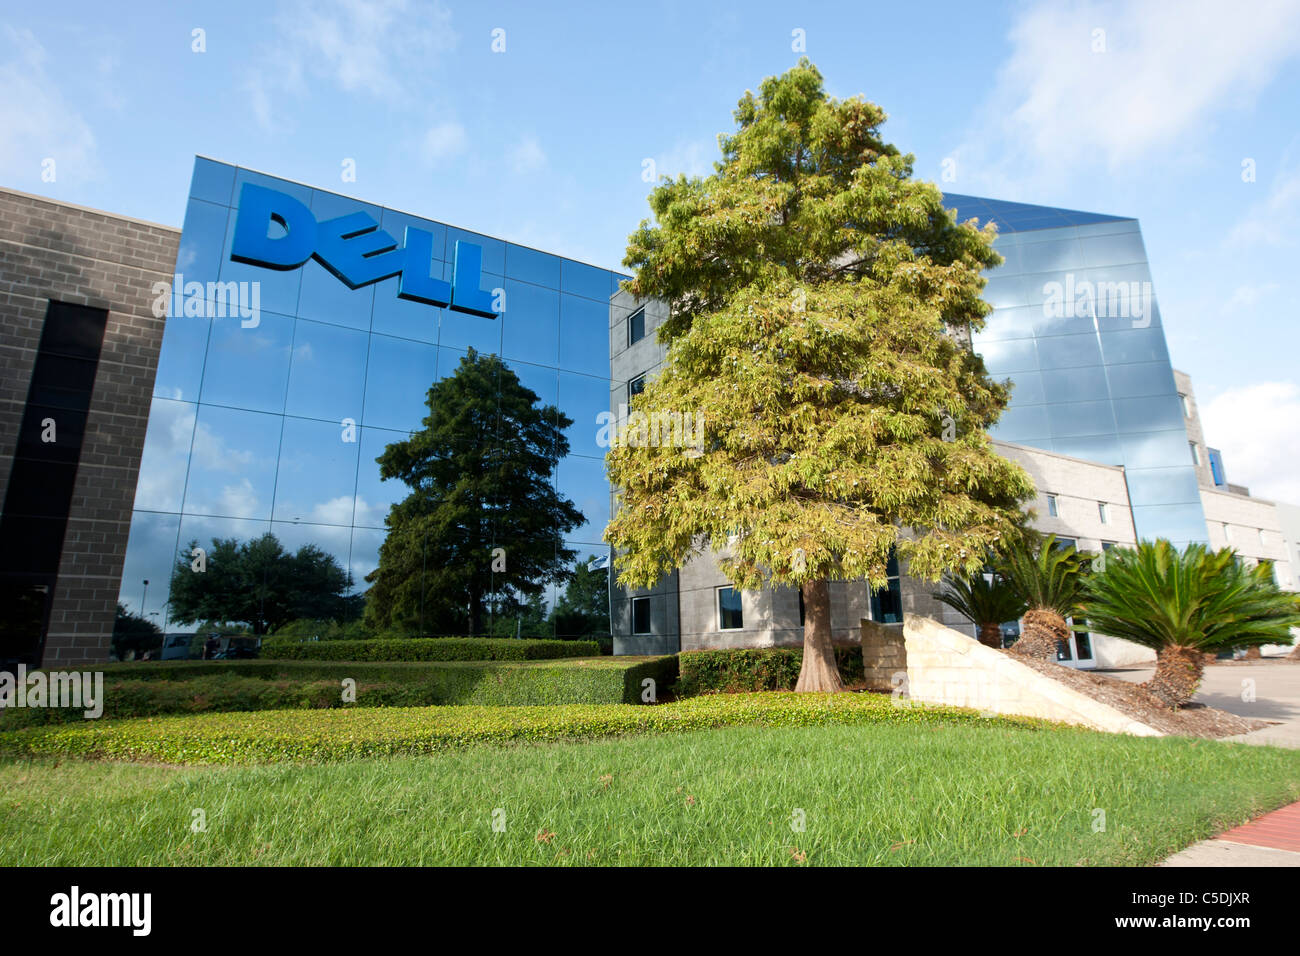 Dell Computers corporate headquarters building in Round Rock, Texas Stock Photo